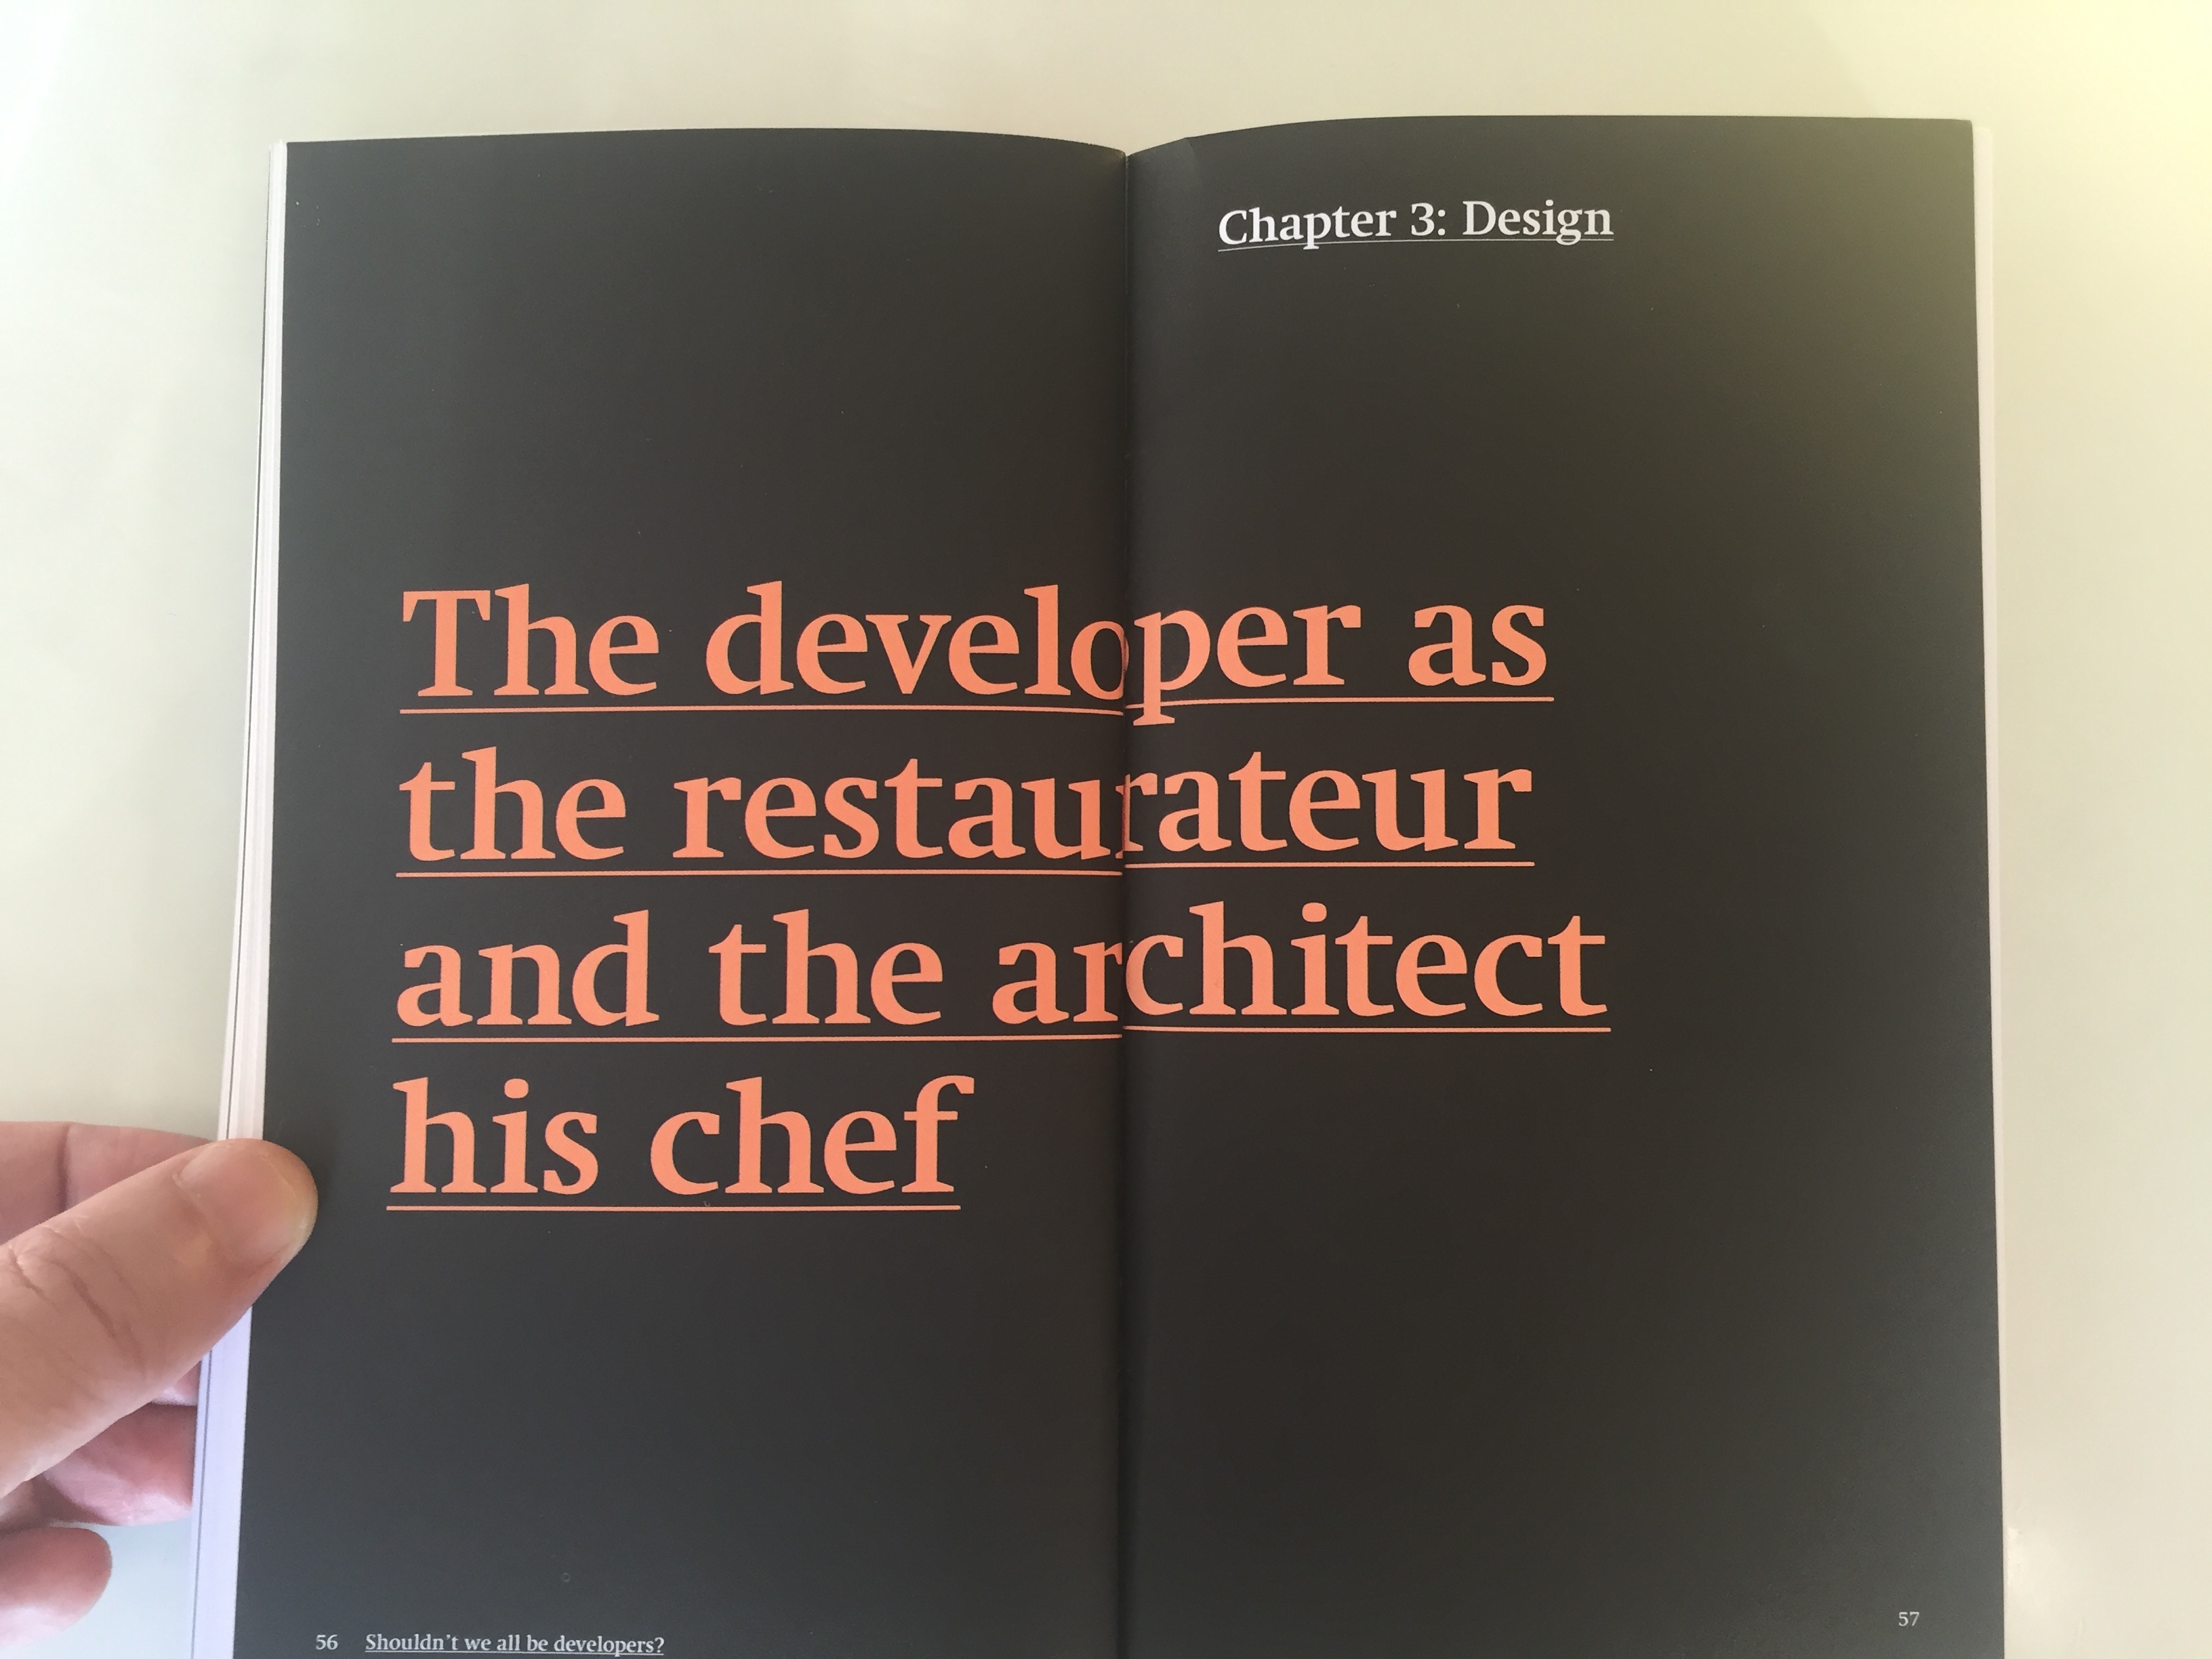 Shouldn't We All be Developers | Solidspace | Roger Zogolovitch | Architect as Developer | Architect and Developer | James Petty